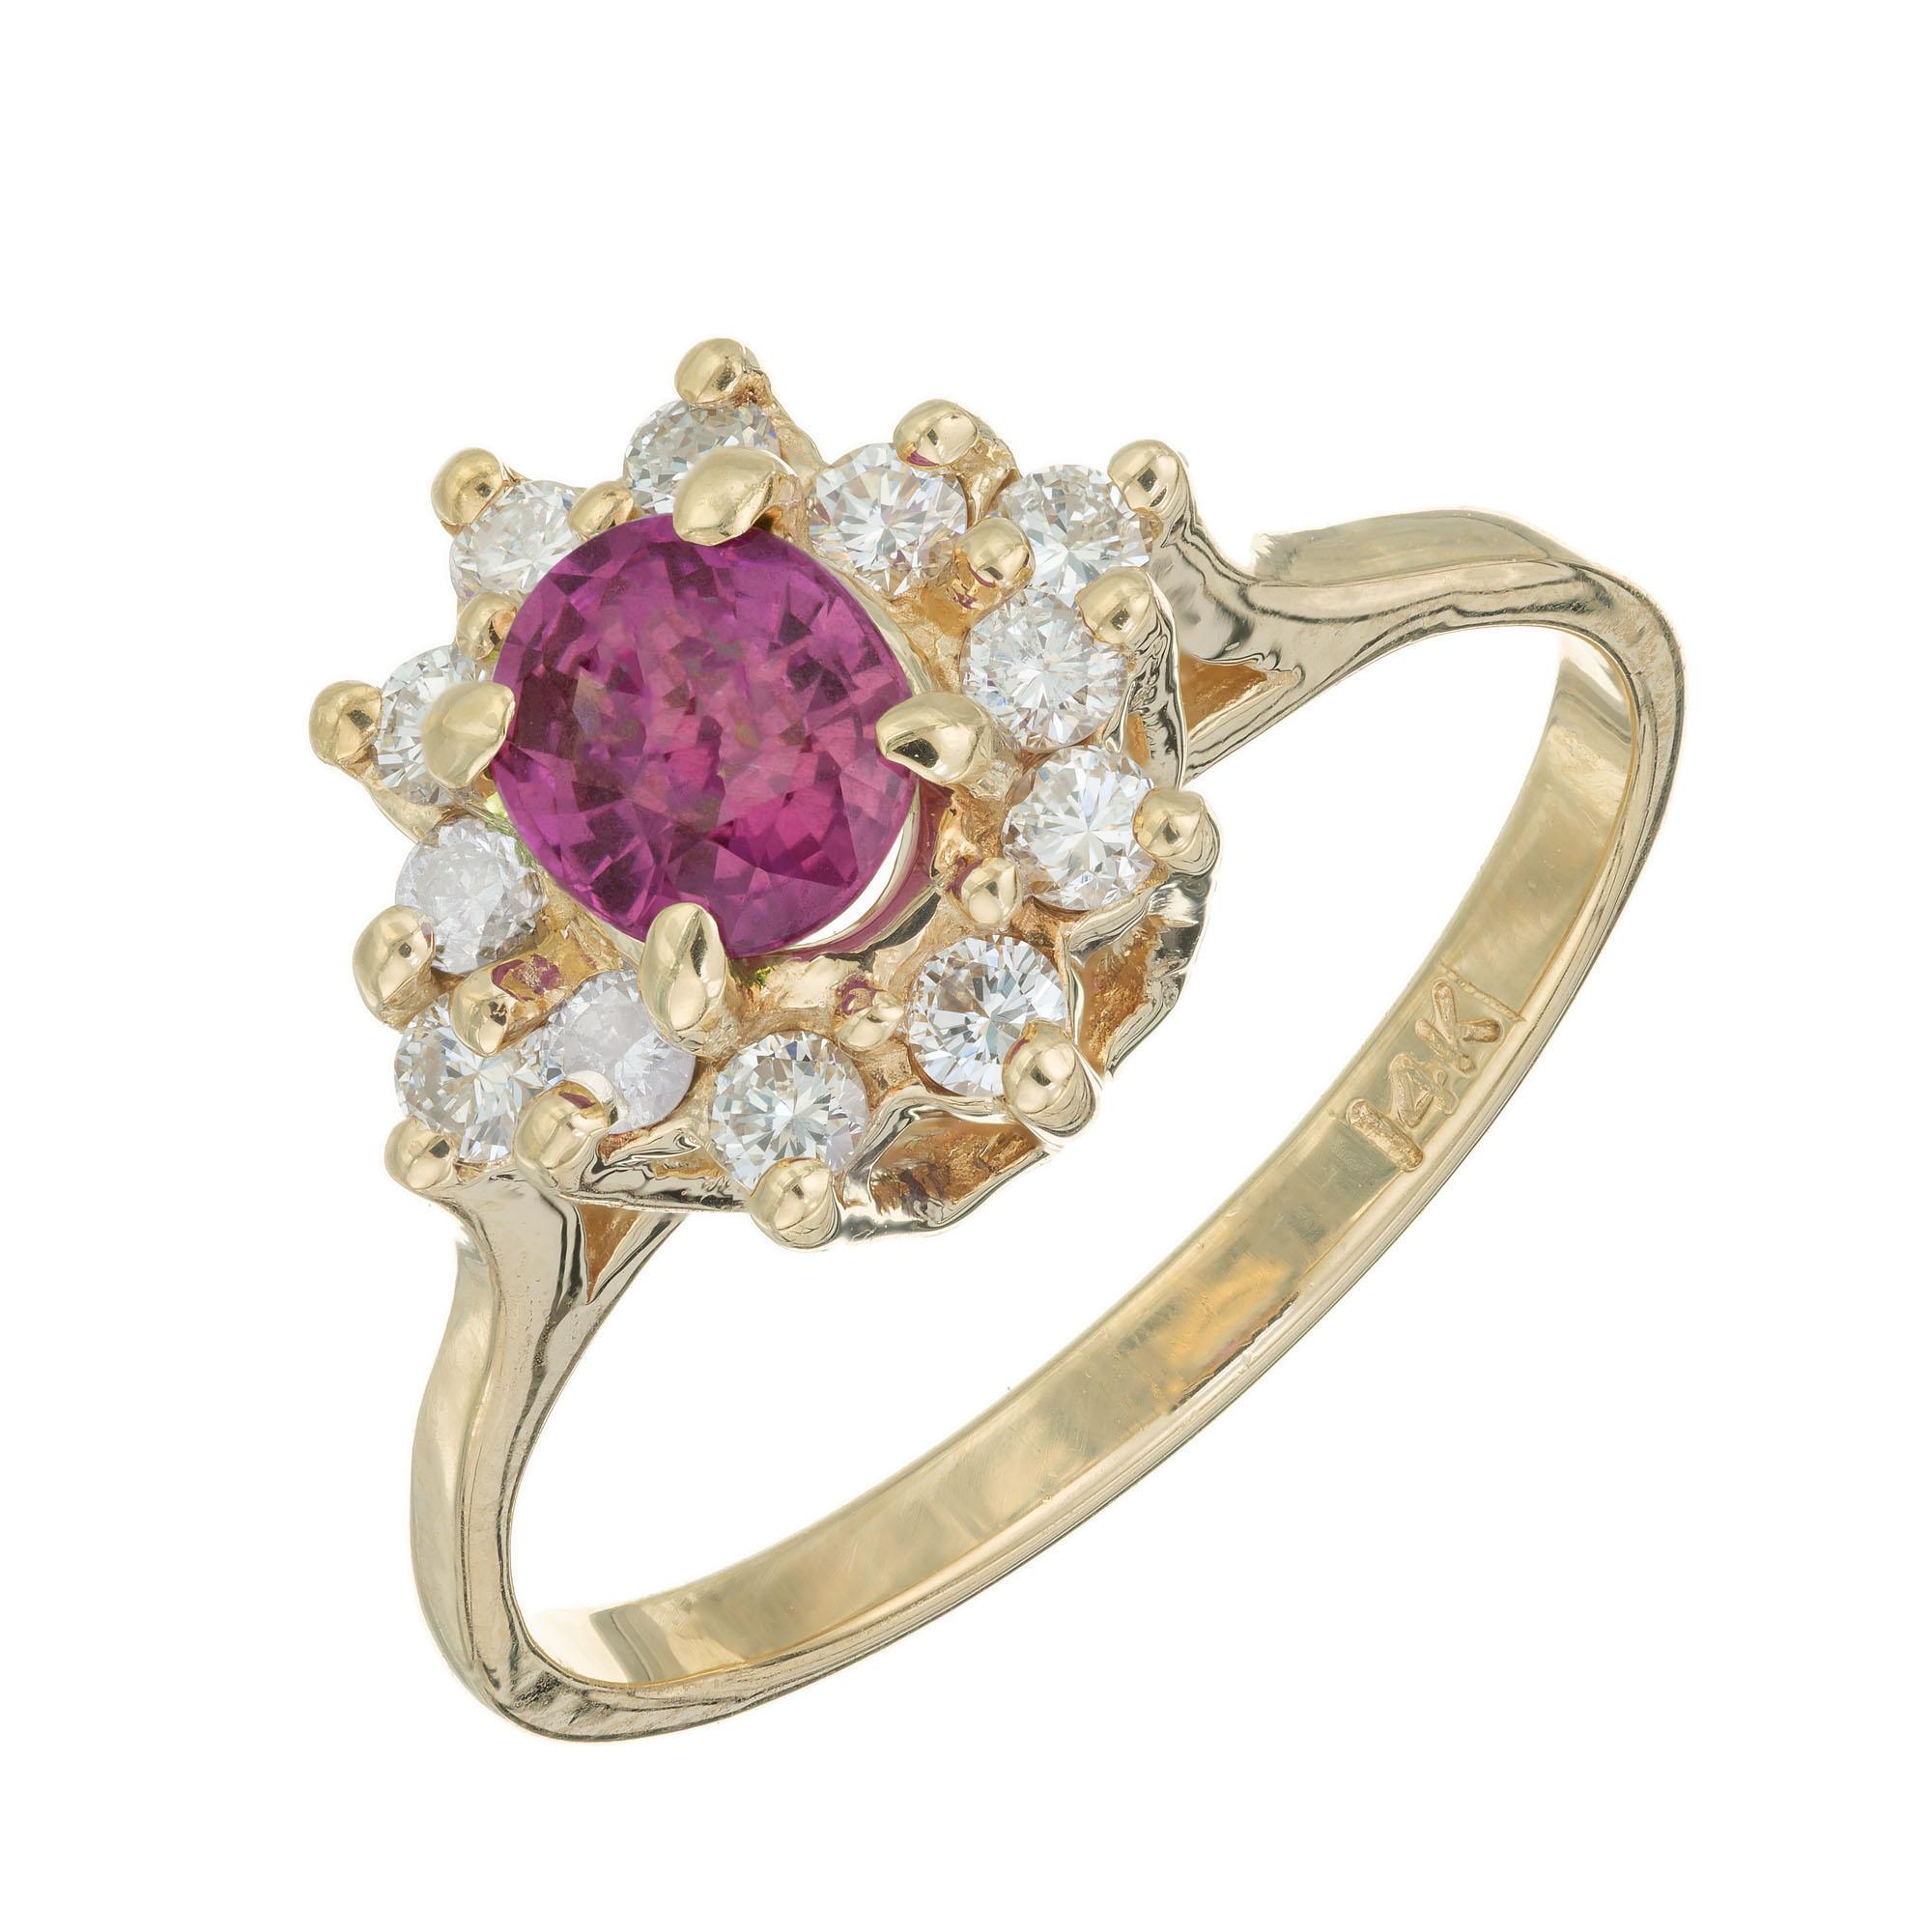 Beautiful pink Sapphire and diamond engagement ring. .55cts oval center pink sapphire with a halo of 12 round diamonds in a 14k yellow gold setting. 

1 genuine pink sapphire approx. total weight .55cts
12 round diamonds approx. total weight .30cts,